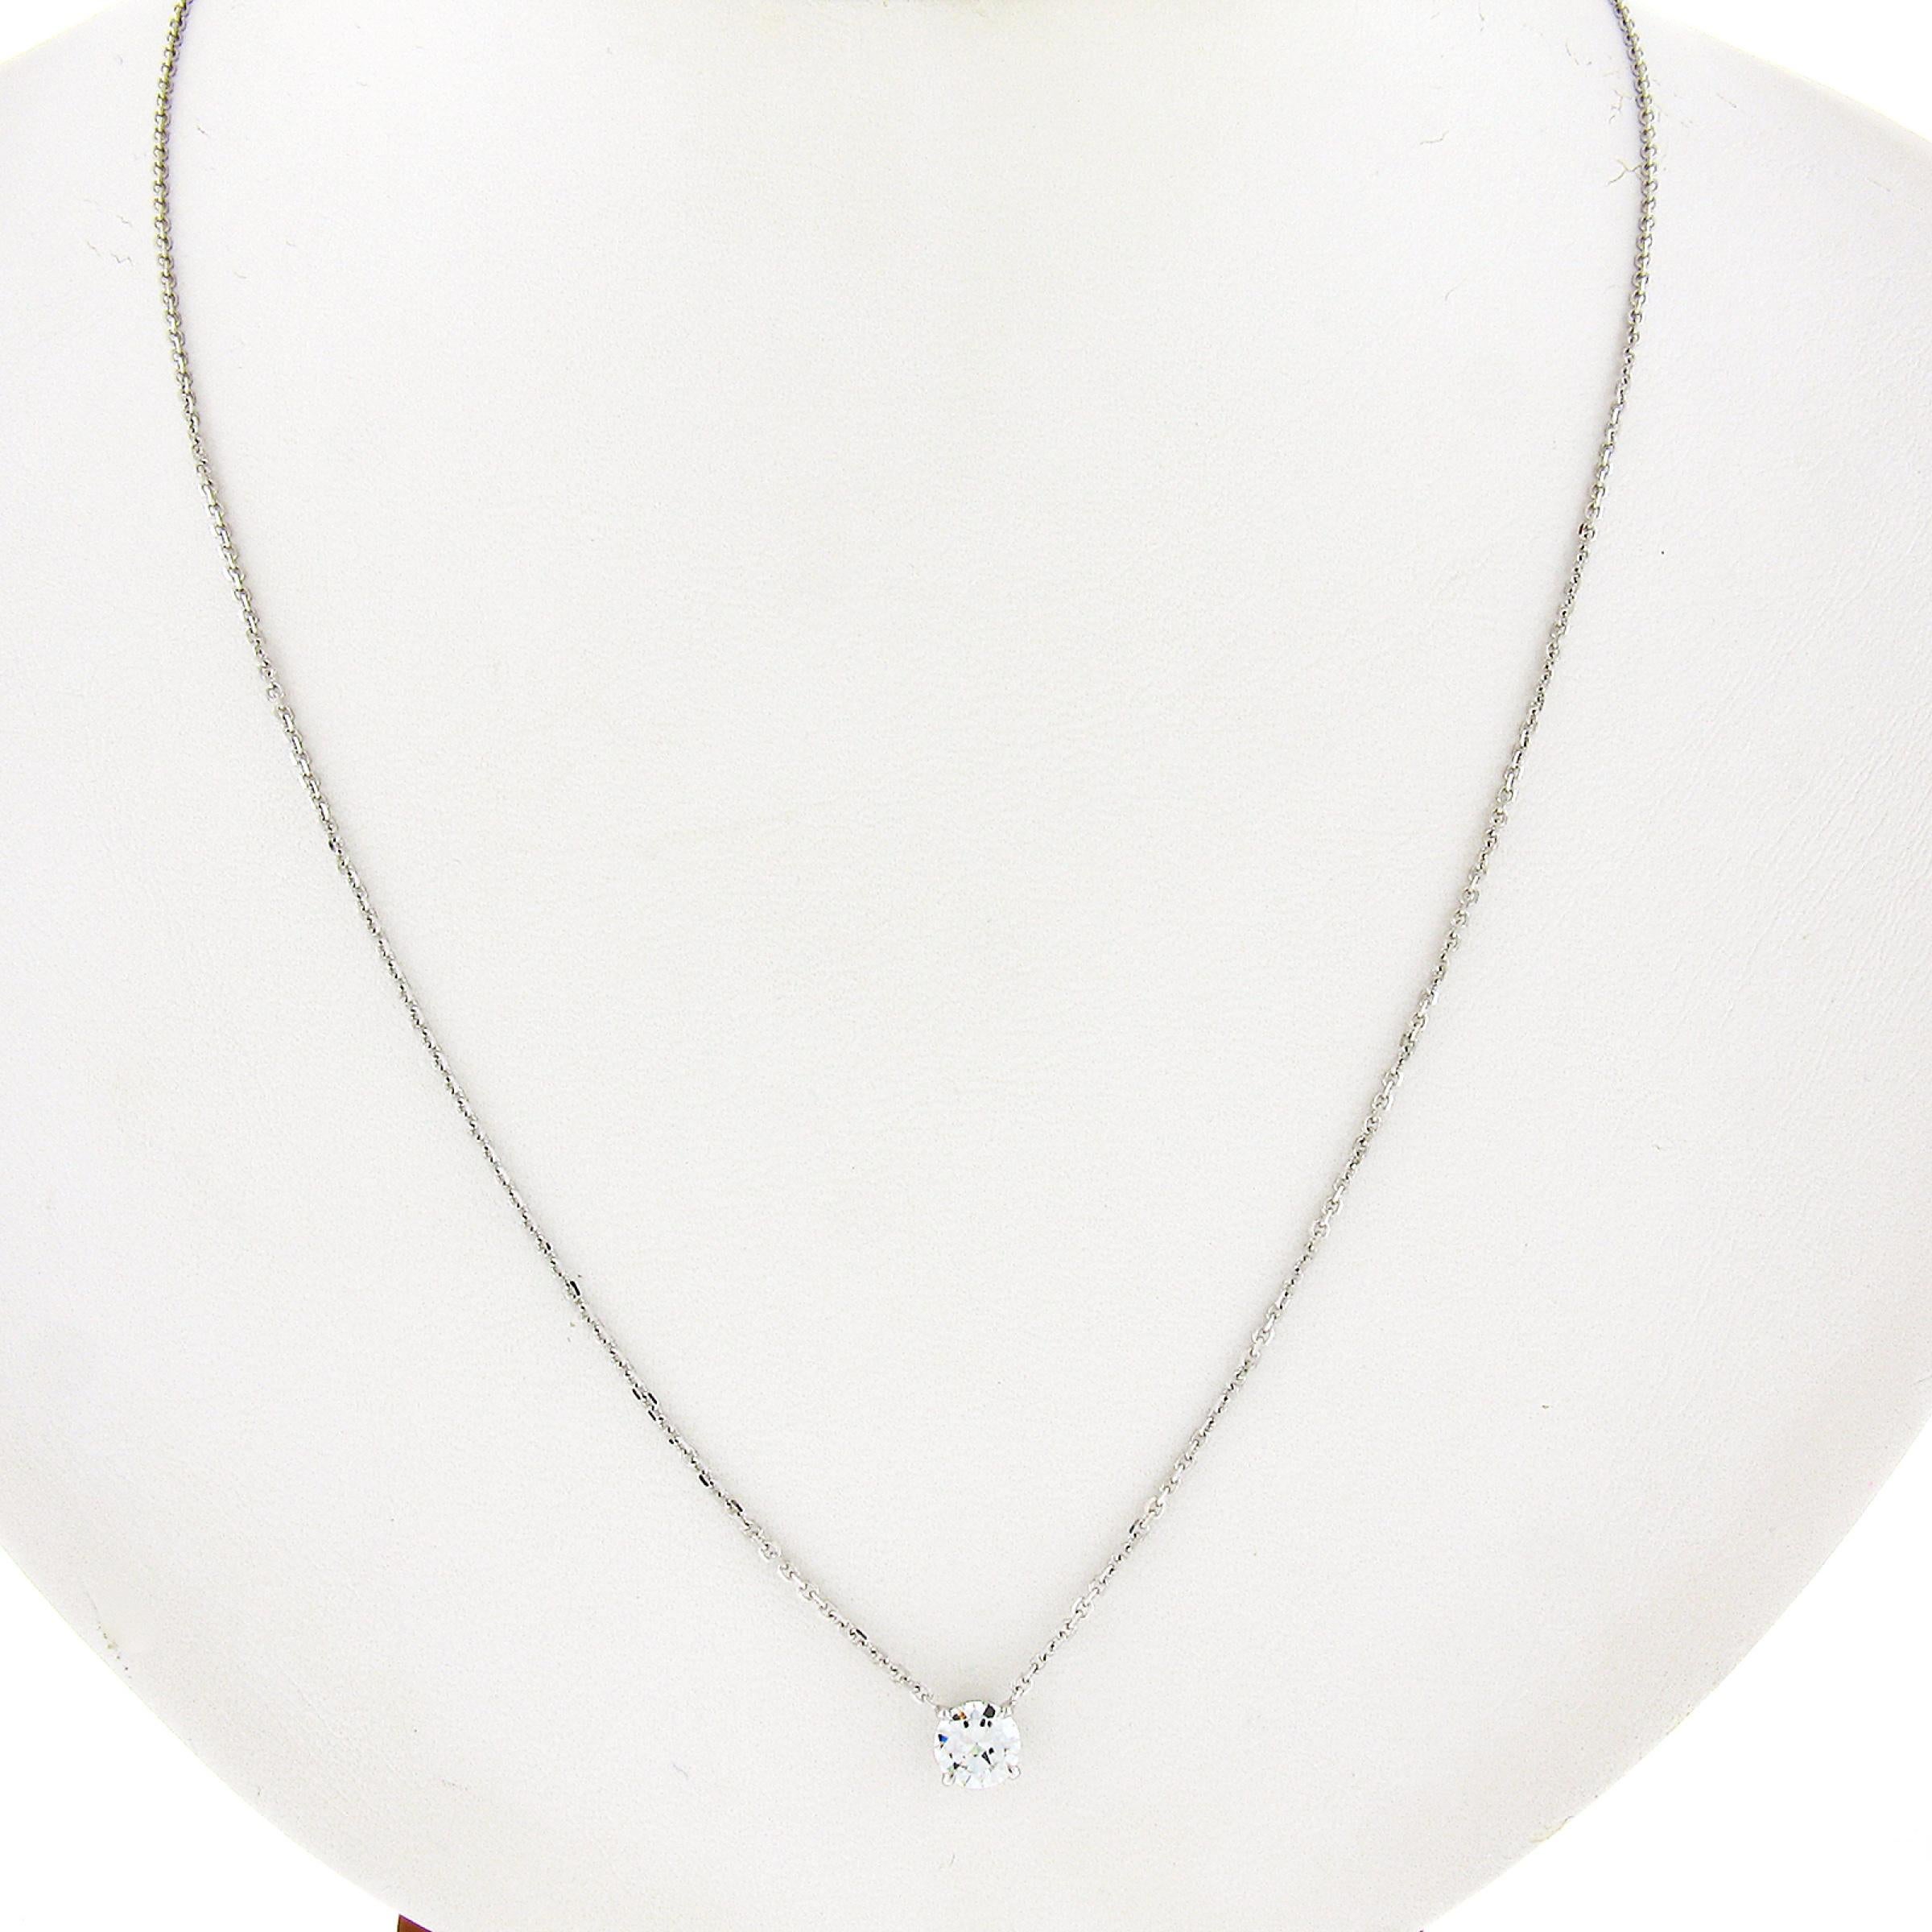 --Stone(s):--
(1) Natural Genuine Diamond - Round Brilliant Cut - Prong Set - VS2 Clarity - I Color 
Total Carat Weight:	0.42 (exact)

Material: Solid 14K White Gold
Weight: 2.32 Grams
Chain Type: 0.7mm Cable Link
Chain Length:	Adjustable at 16 or